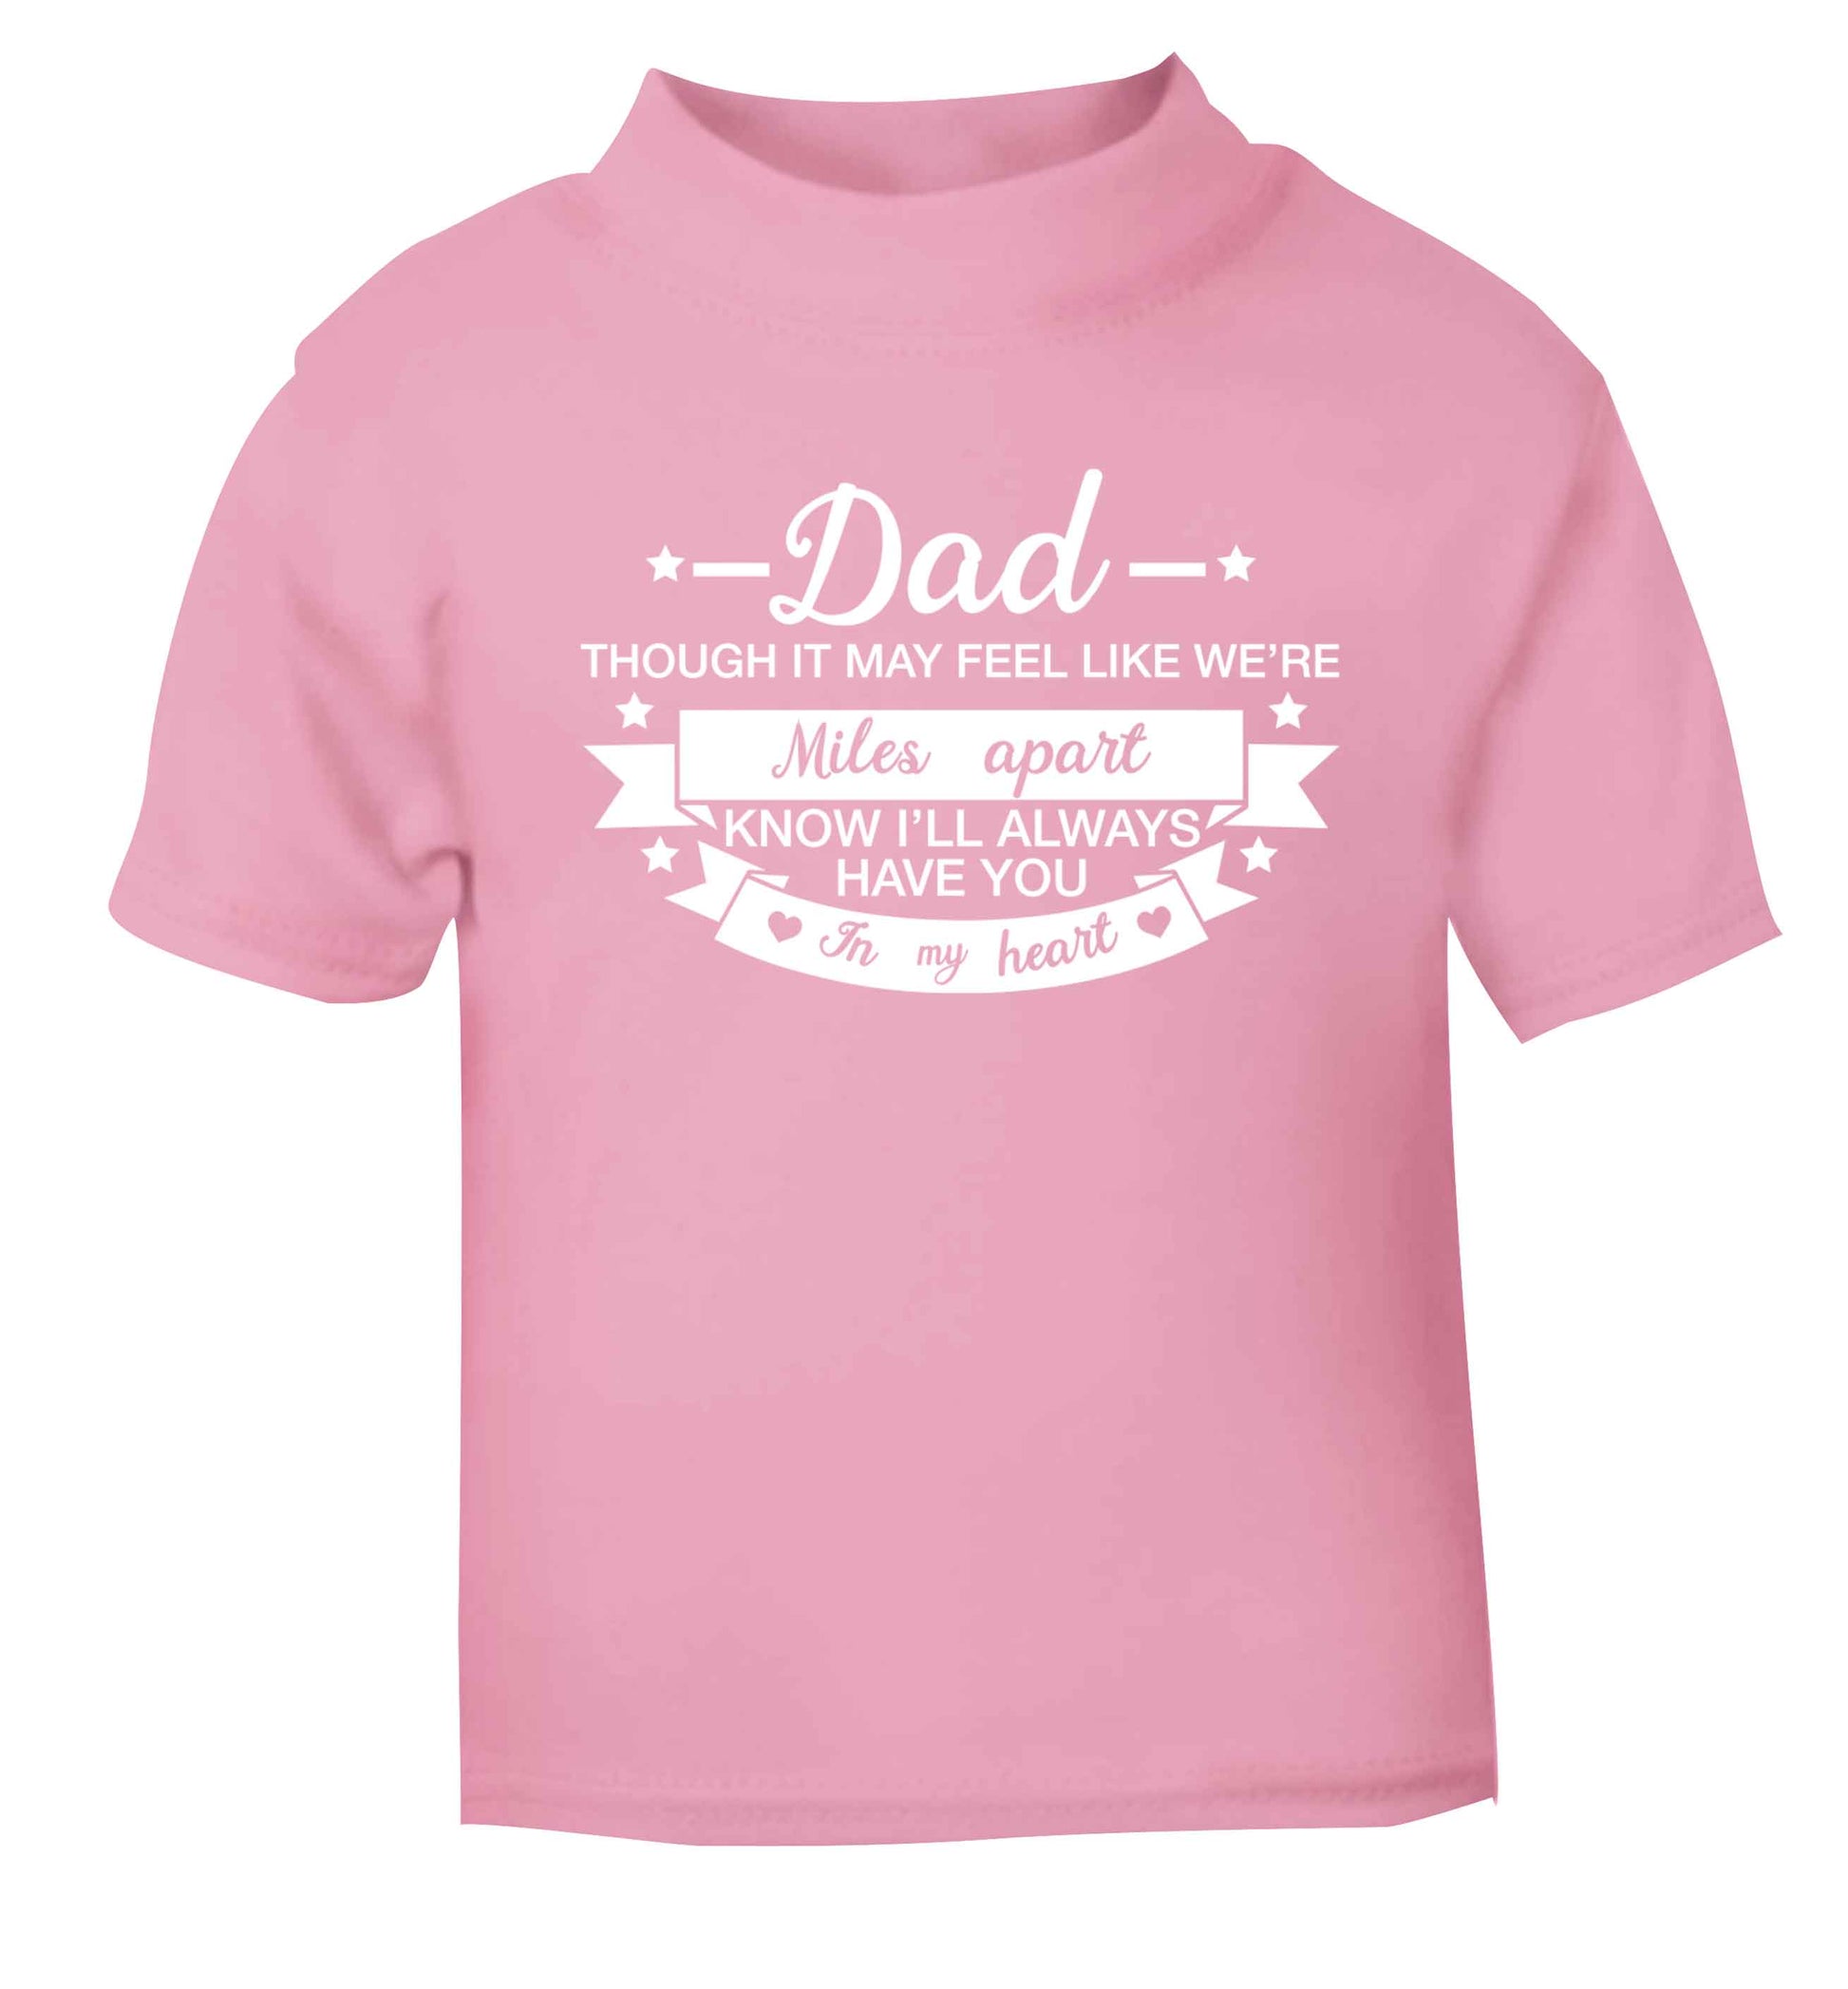 Dad though it may feel like we're miles apart know I'll always have you in my heart light pink baby toddler Tshirt 2 Years